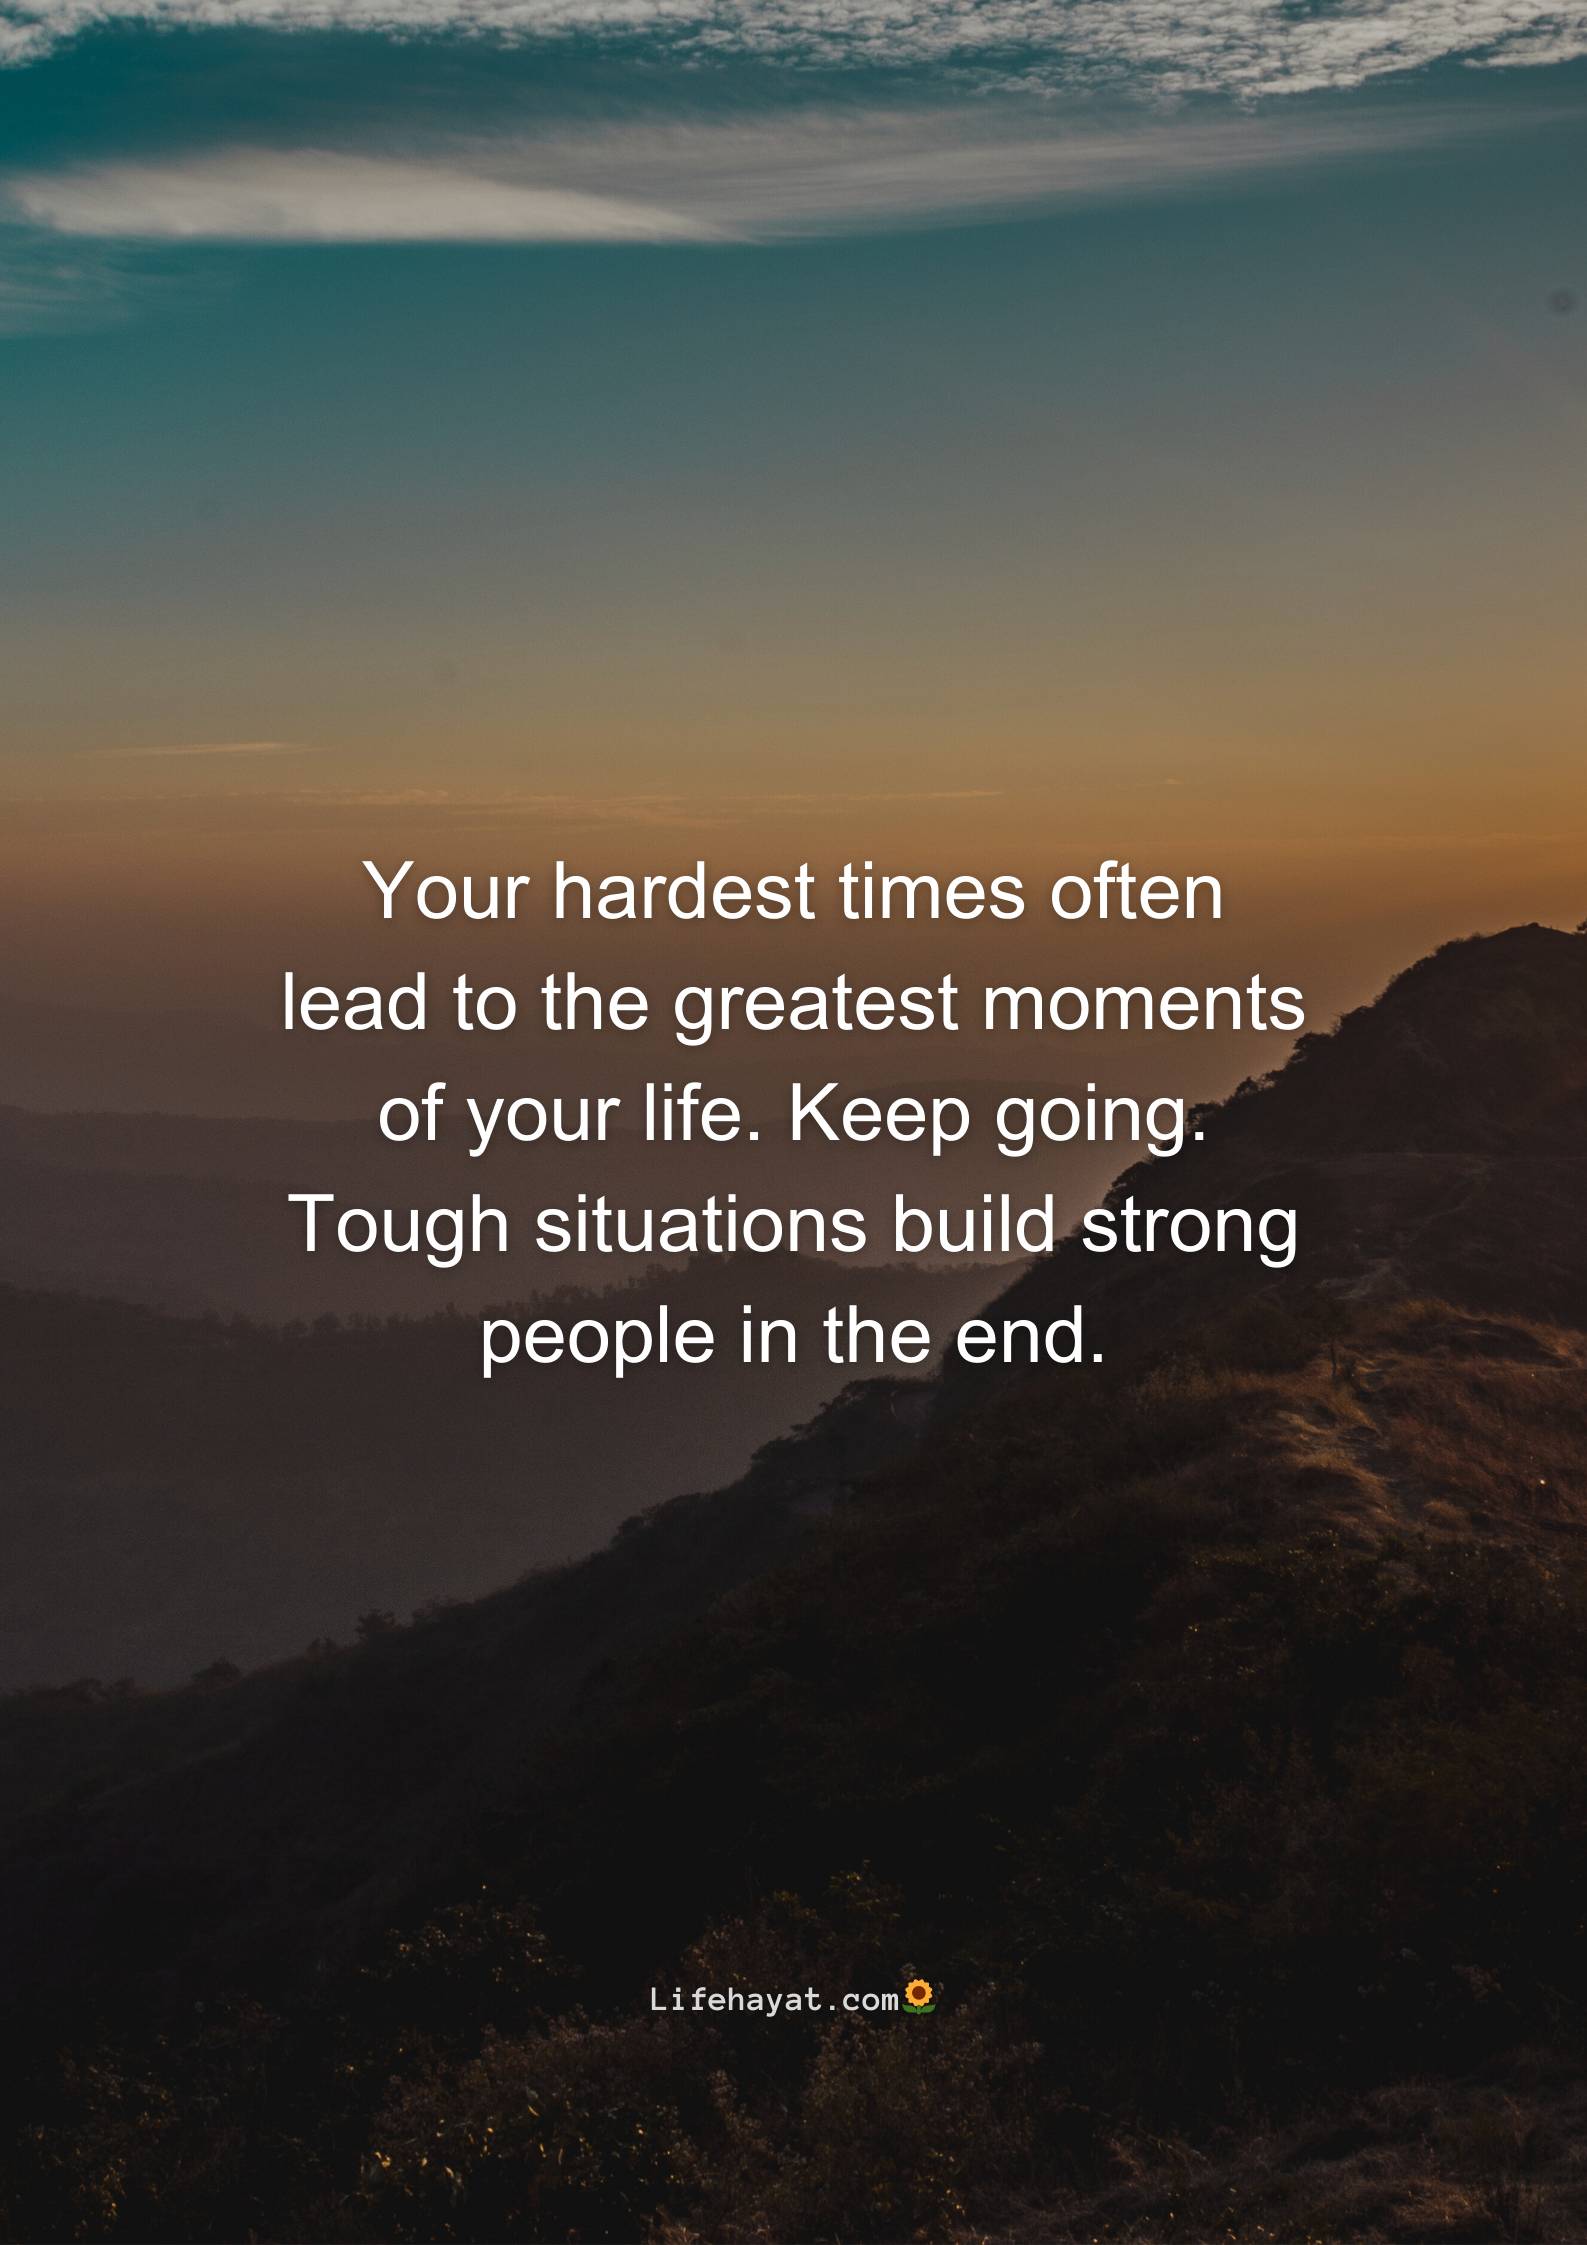 Your hardest times lead to